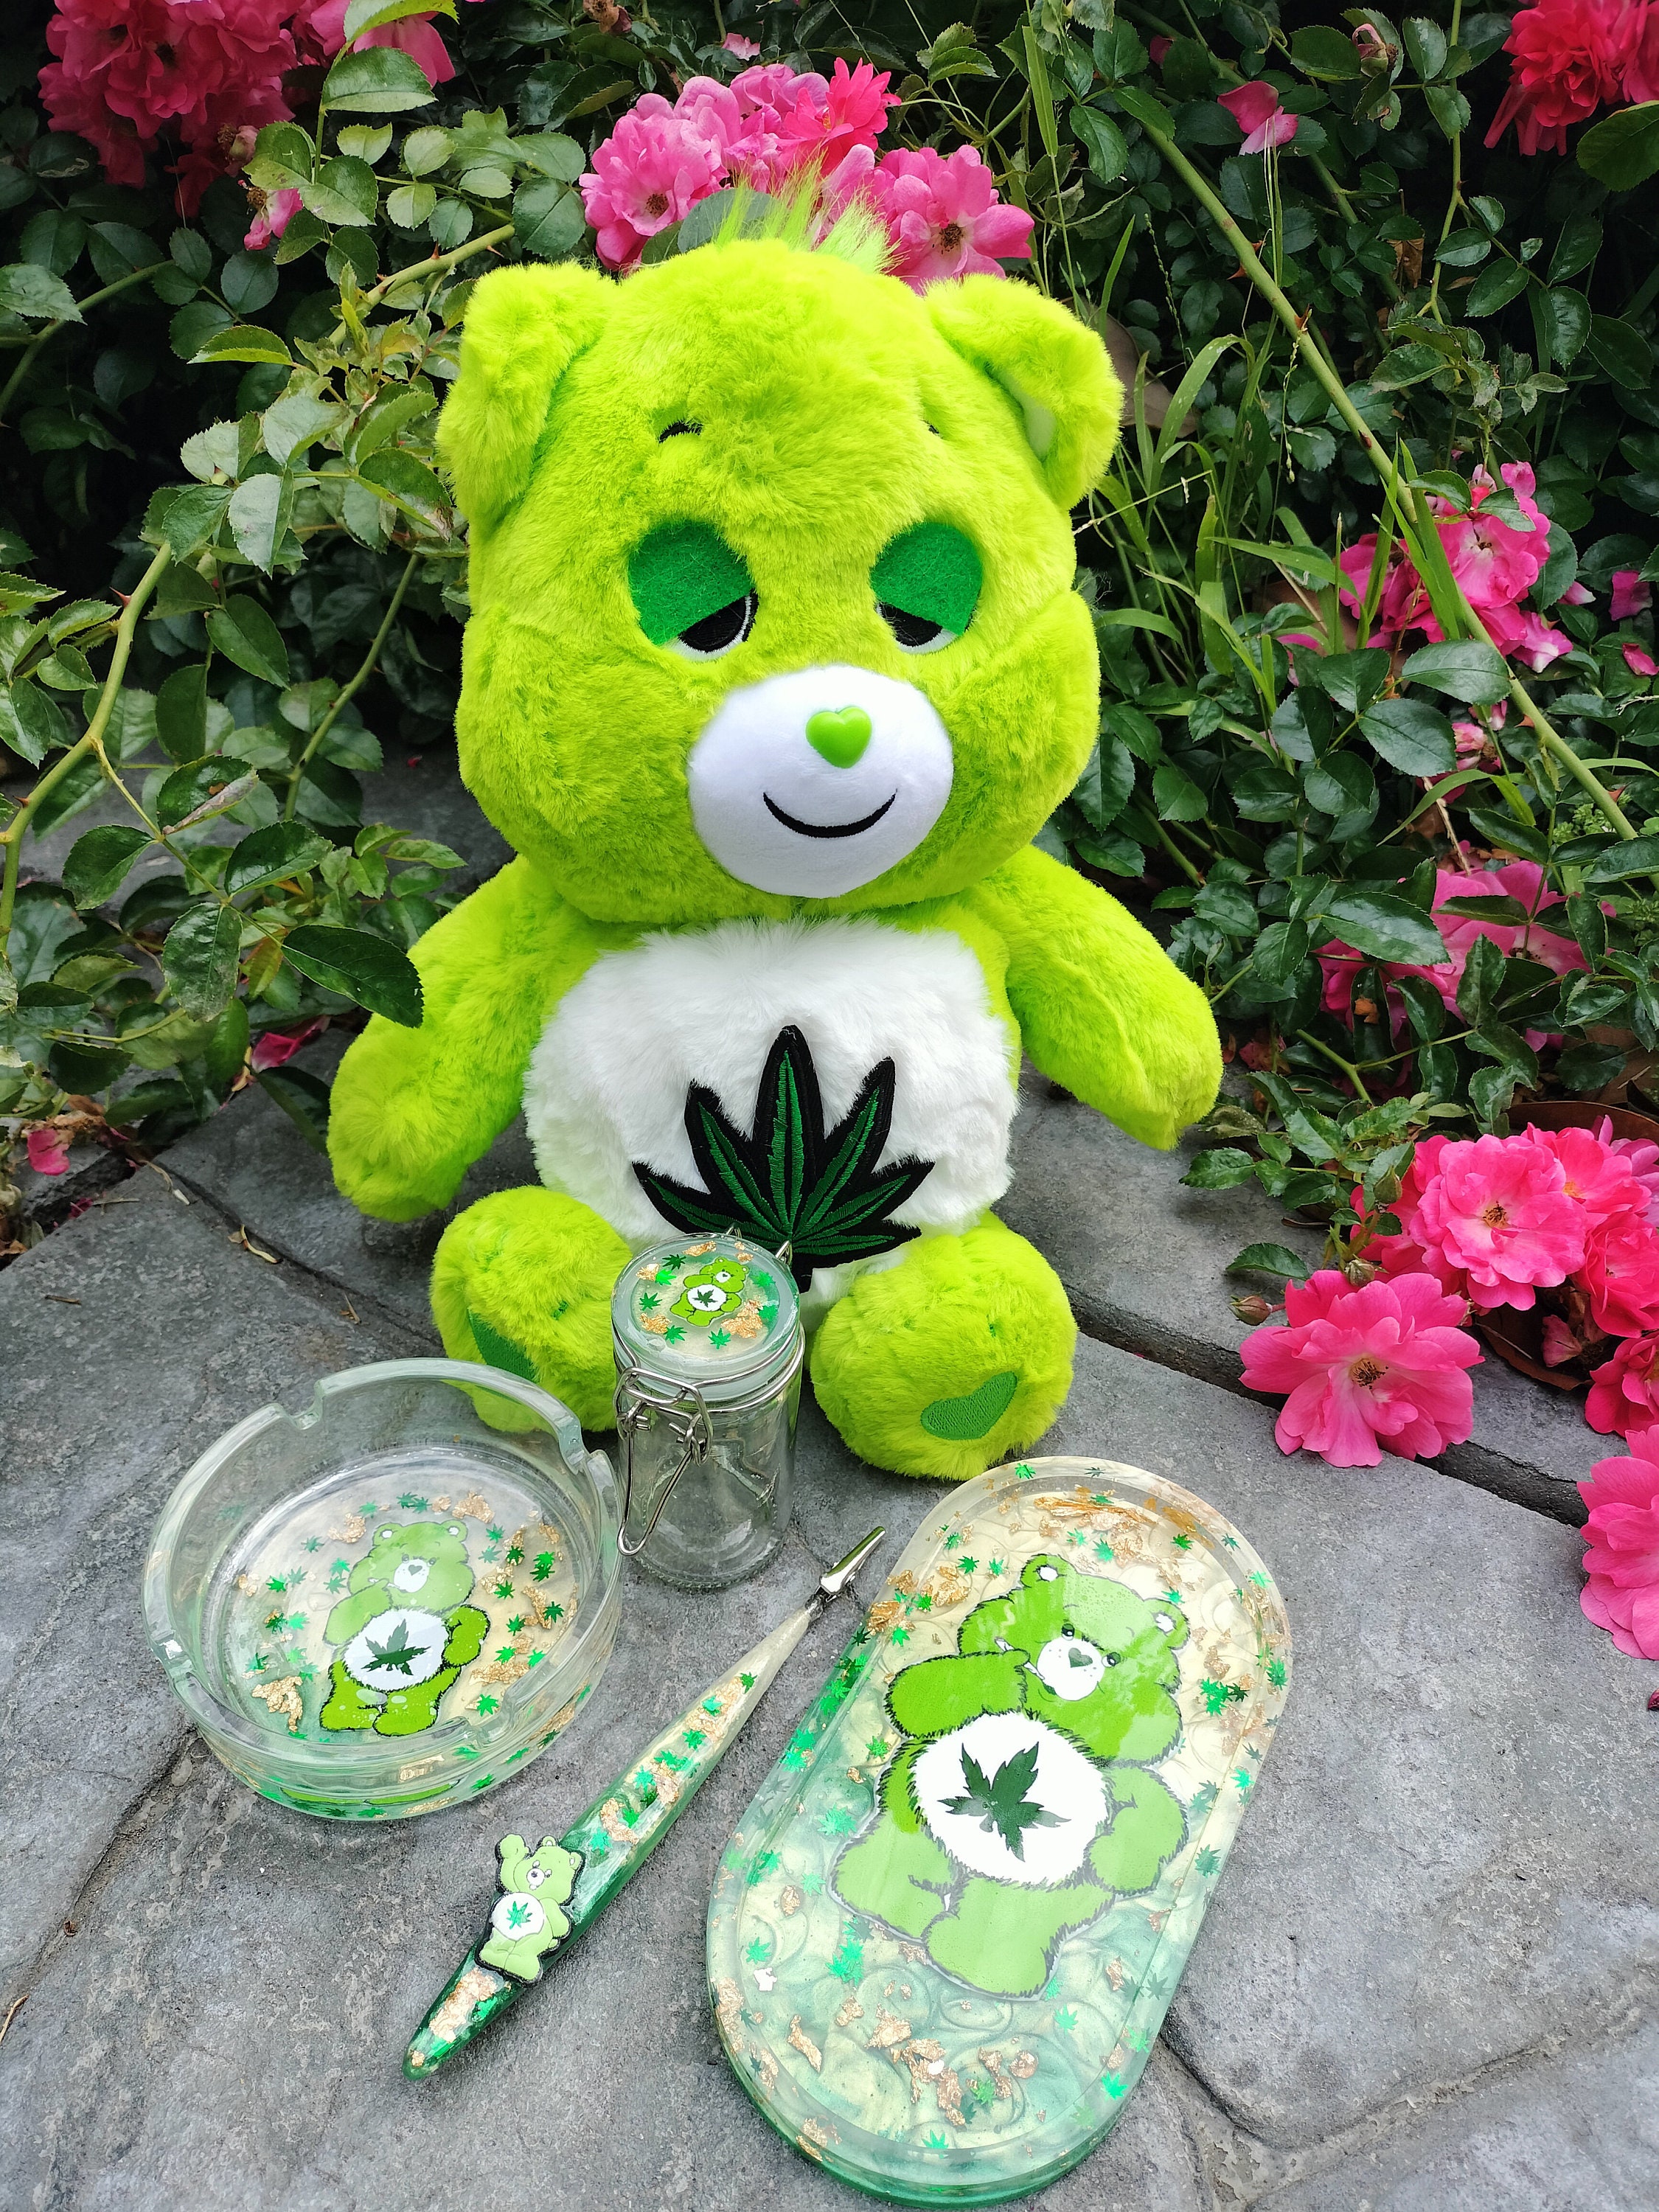 Dont Care Bear Stickers, Laptop Stoner Stickers 